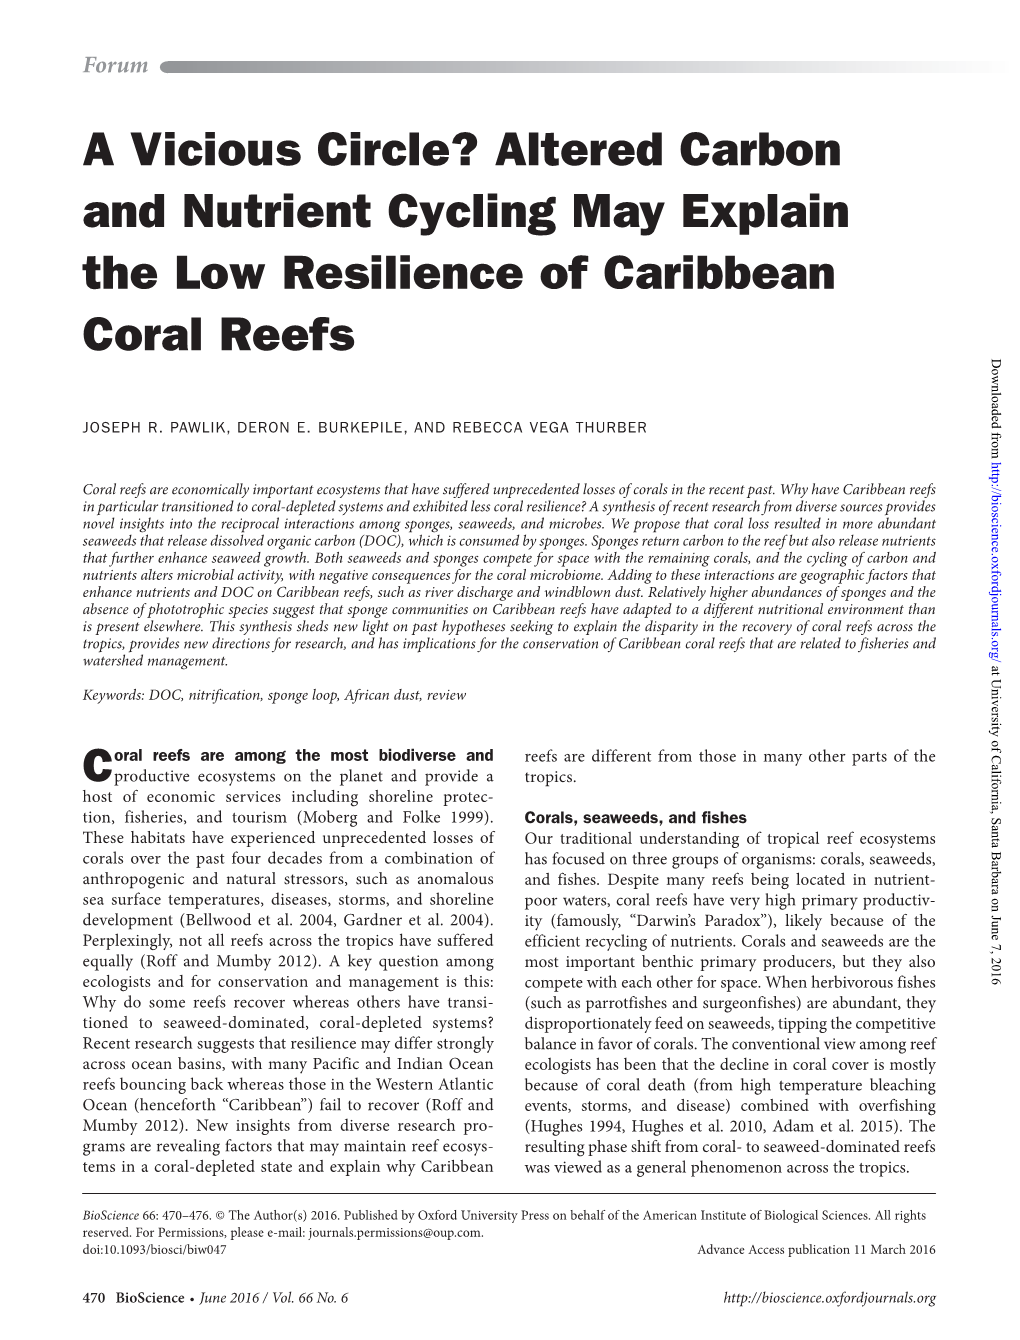 Altered Carbon and Nutrient Cycling May Explain the Low Resilience of Caribbean